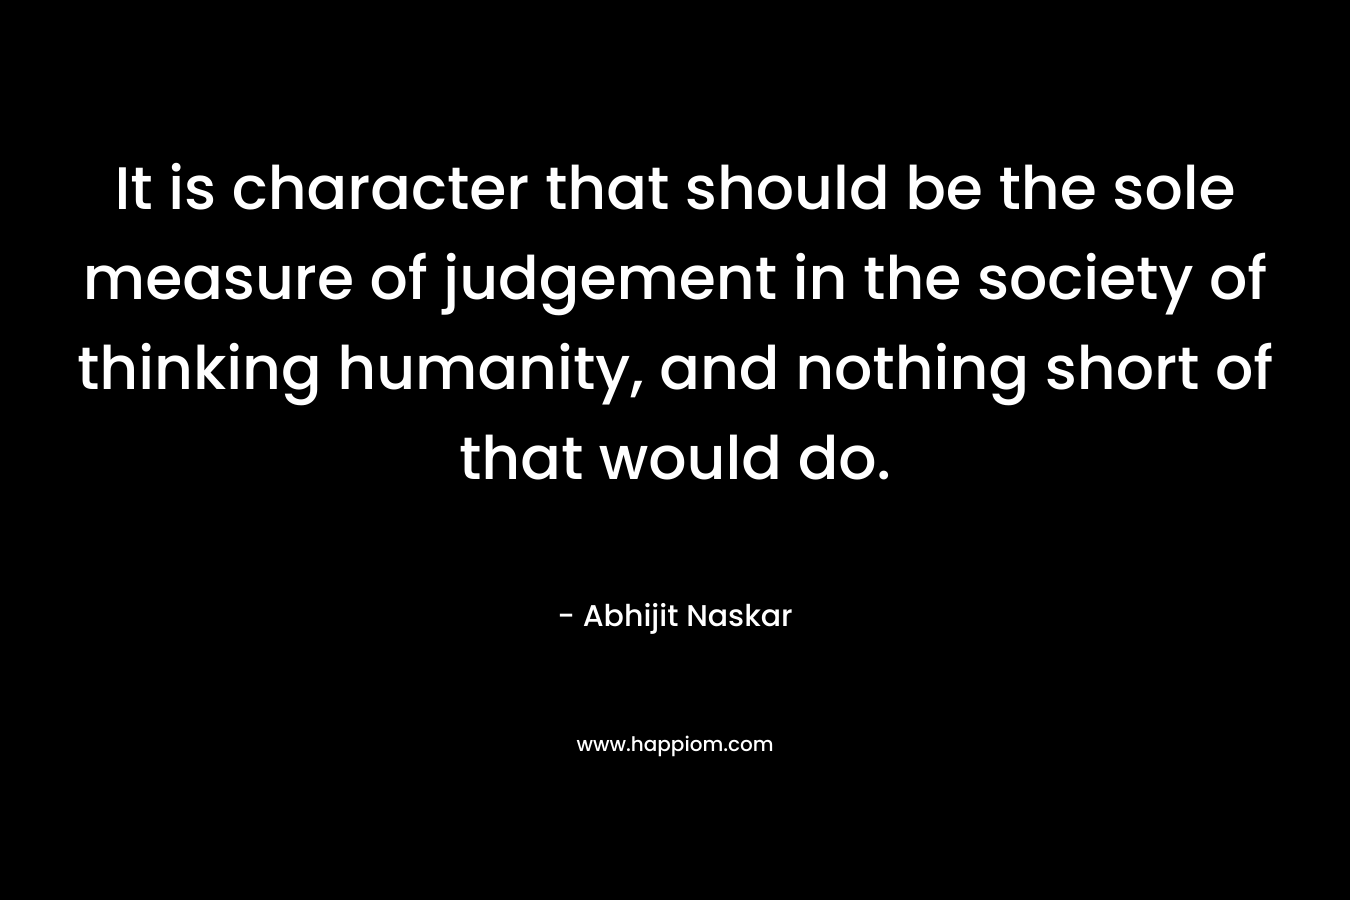 It is character that should be the sole measure of judgement in the society of thinking humanity, and nothing short of that would do. – Abhijit Naskar